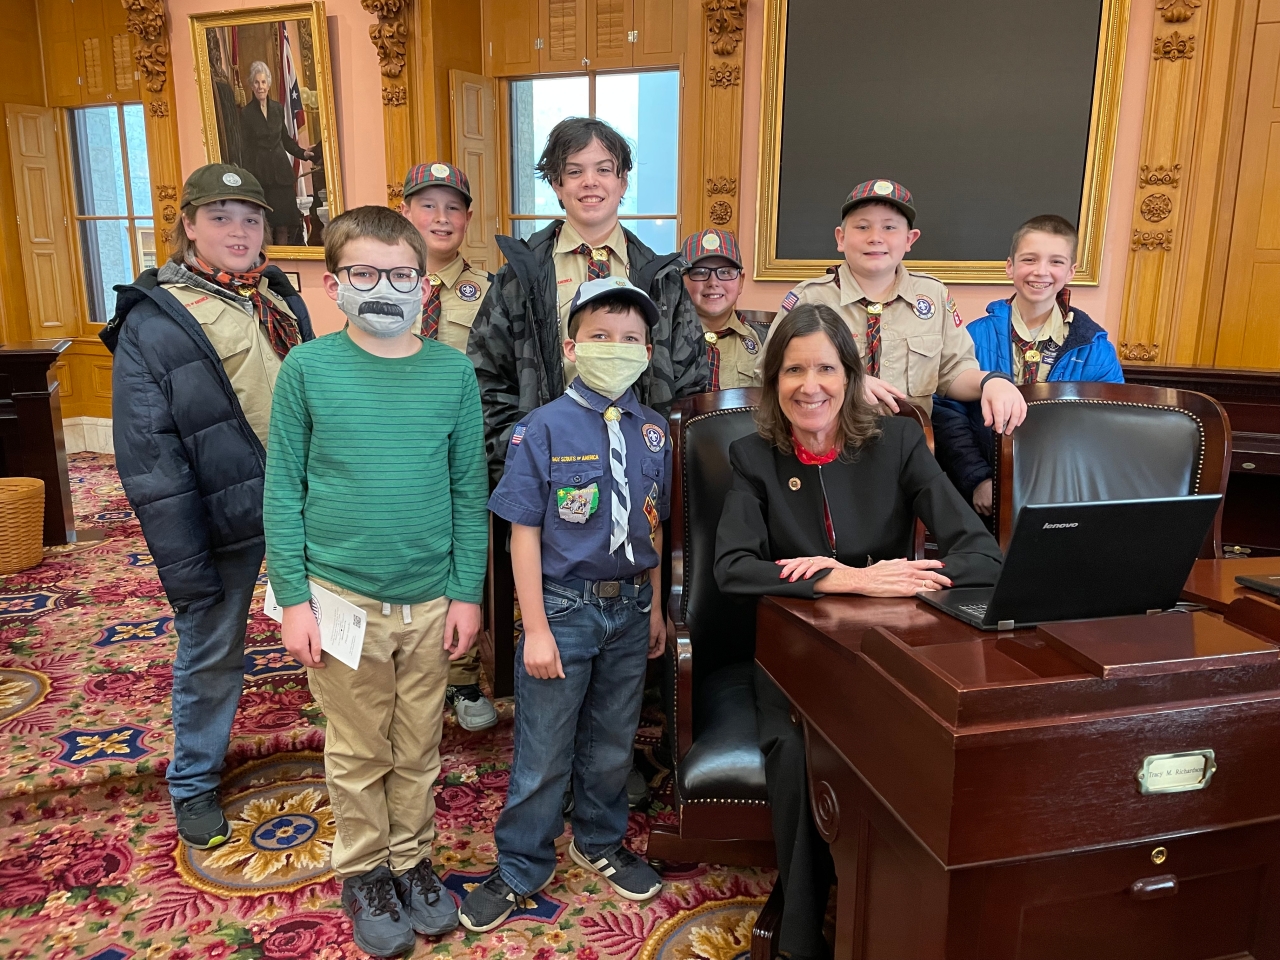 Representative Richardson was happy to welcome Cub Scout Pack 634 to the Ohio Statehouse.